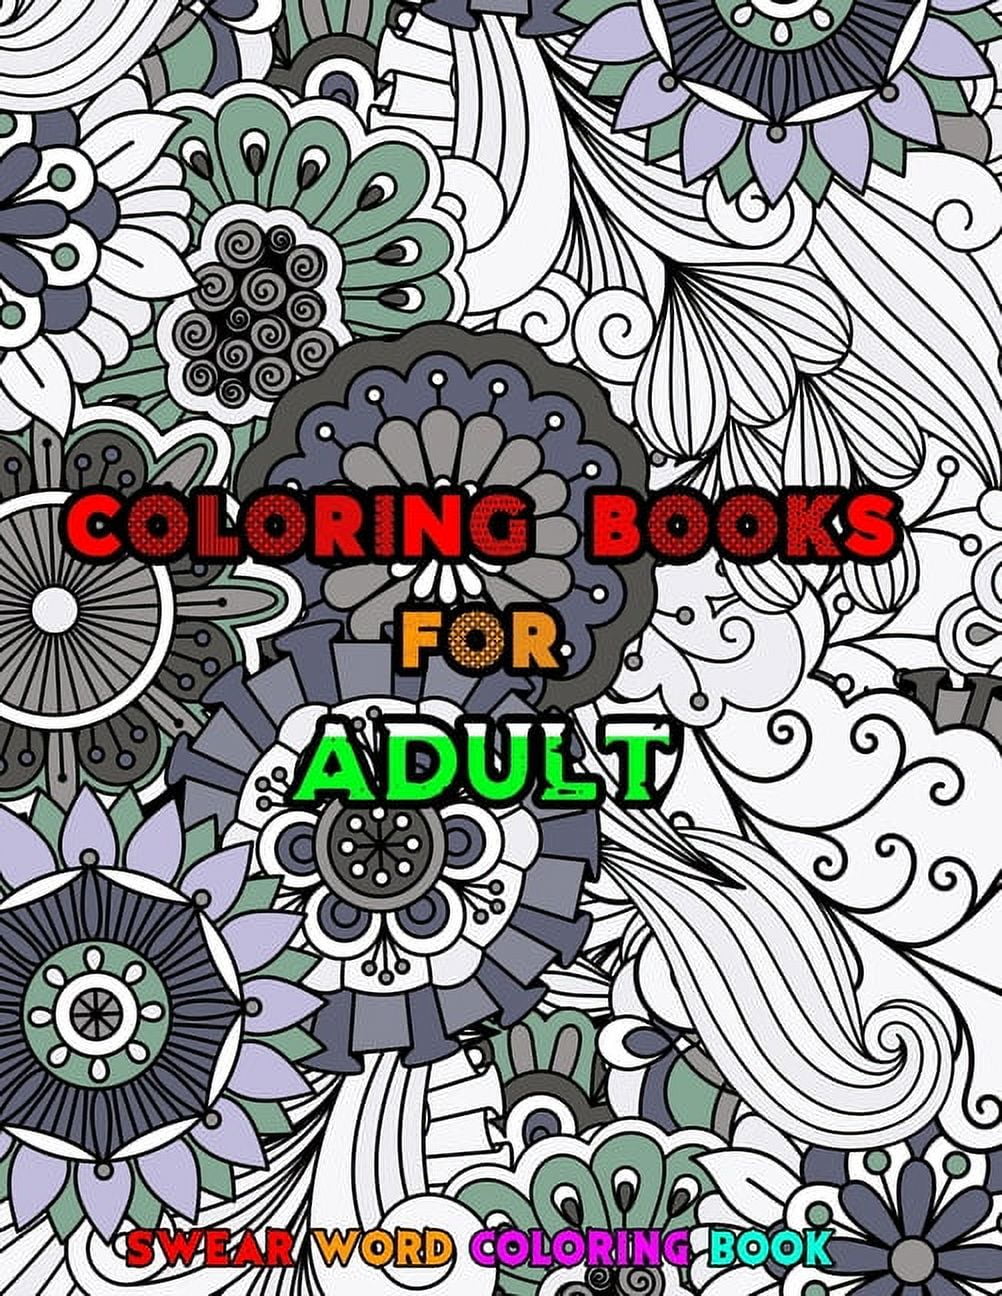 Swear Word Coloring Books for Adult: A Motivating Swear Word Coloring Book  for Adults । Geometric Mandala Designs Coloring । Stress Relief  